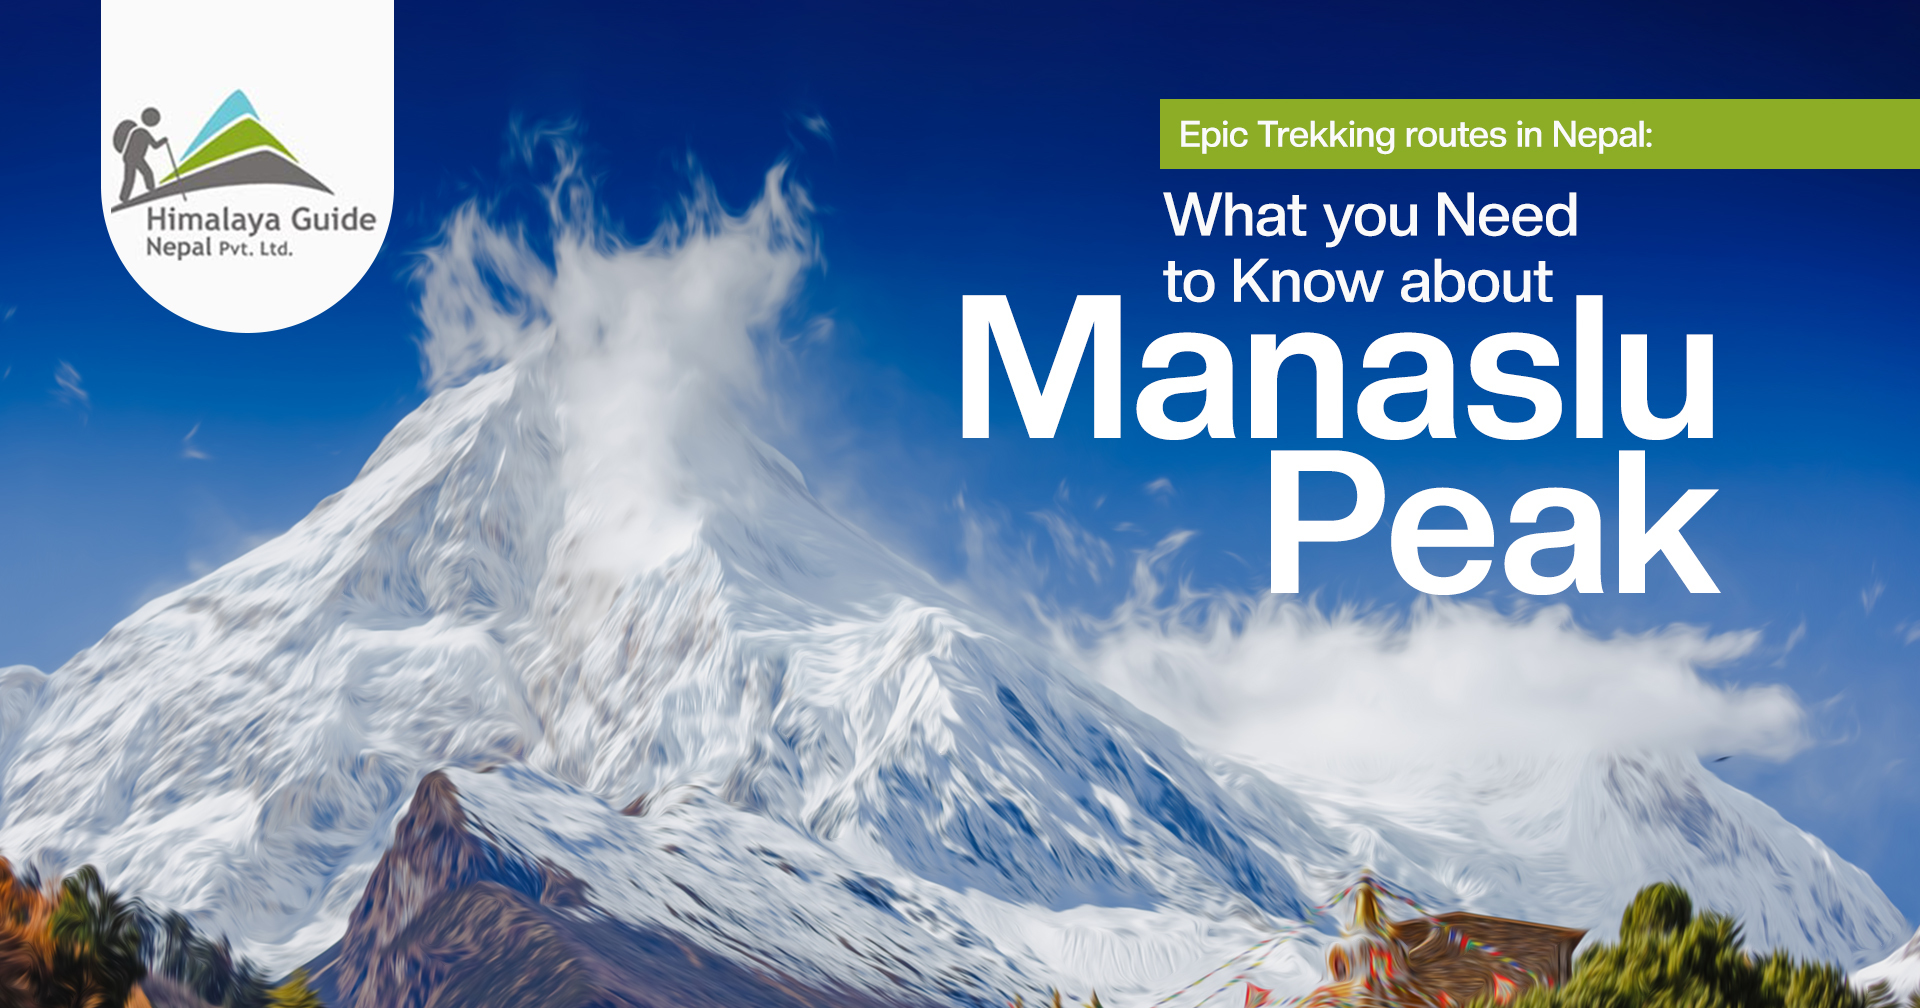 Epic Trekking Routes in Nepal: What you Need to Know about Manaslu Peak 